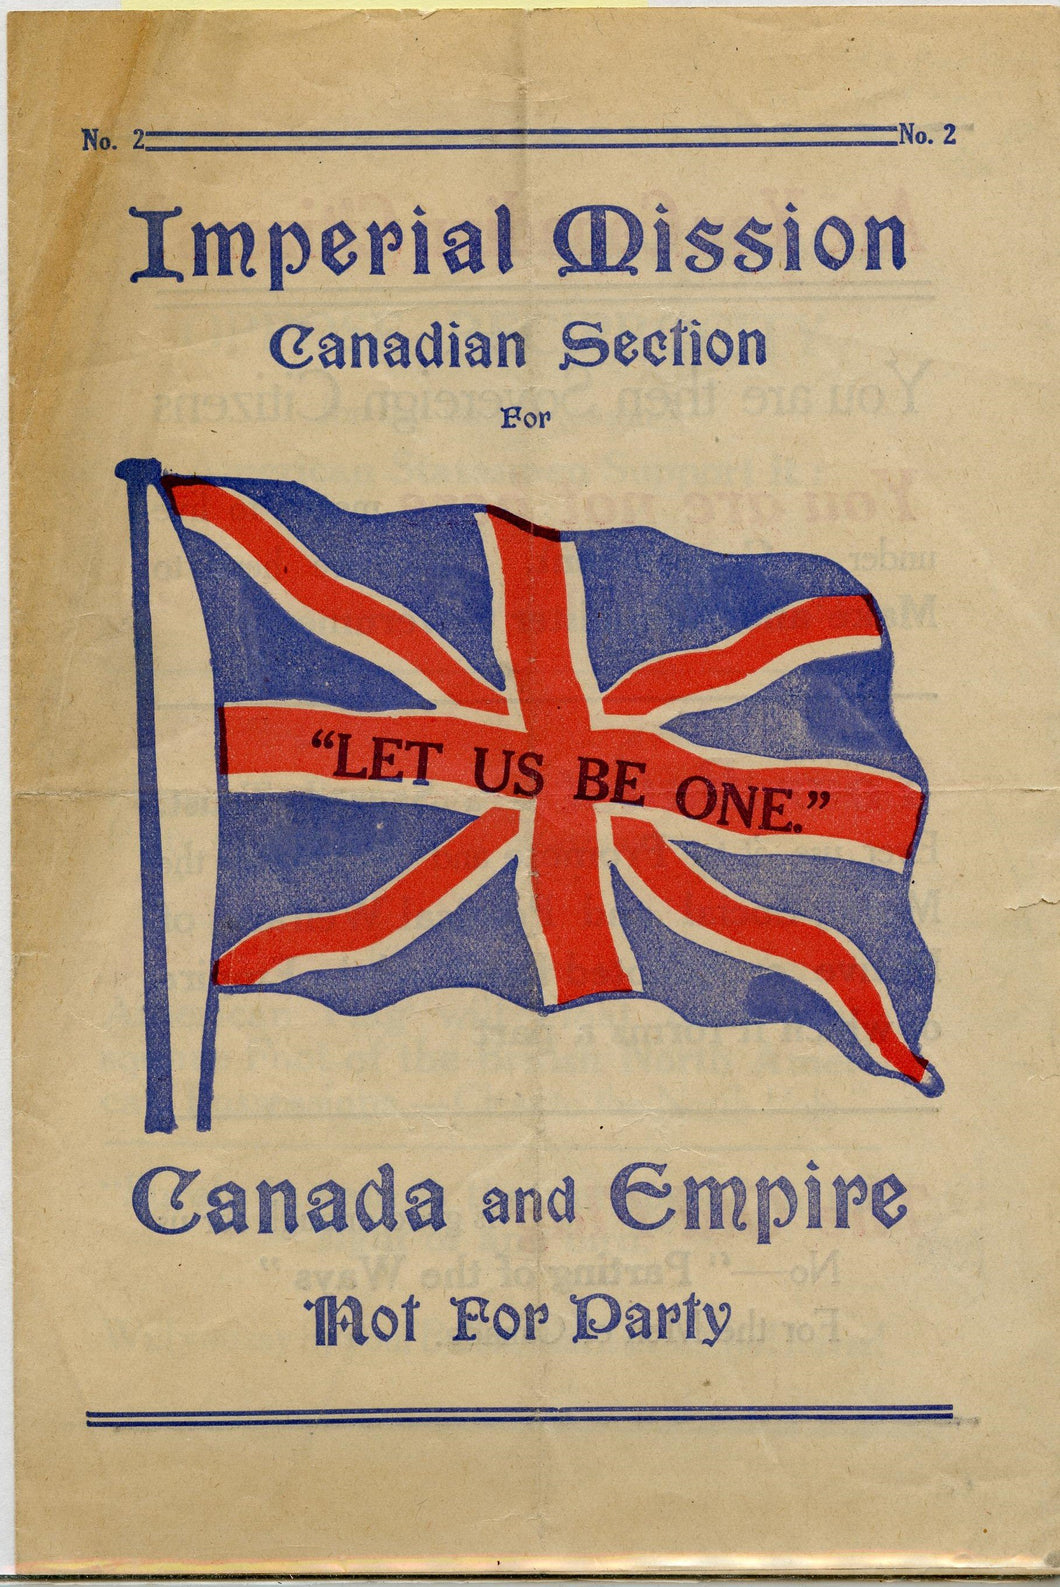 Imperial Mission: Canadian Section. For Canada and Empire, Not For Party